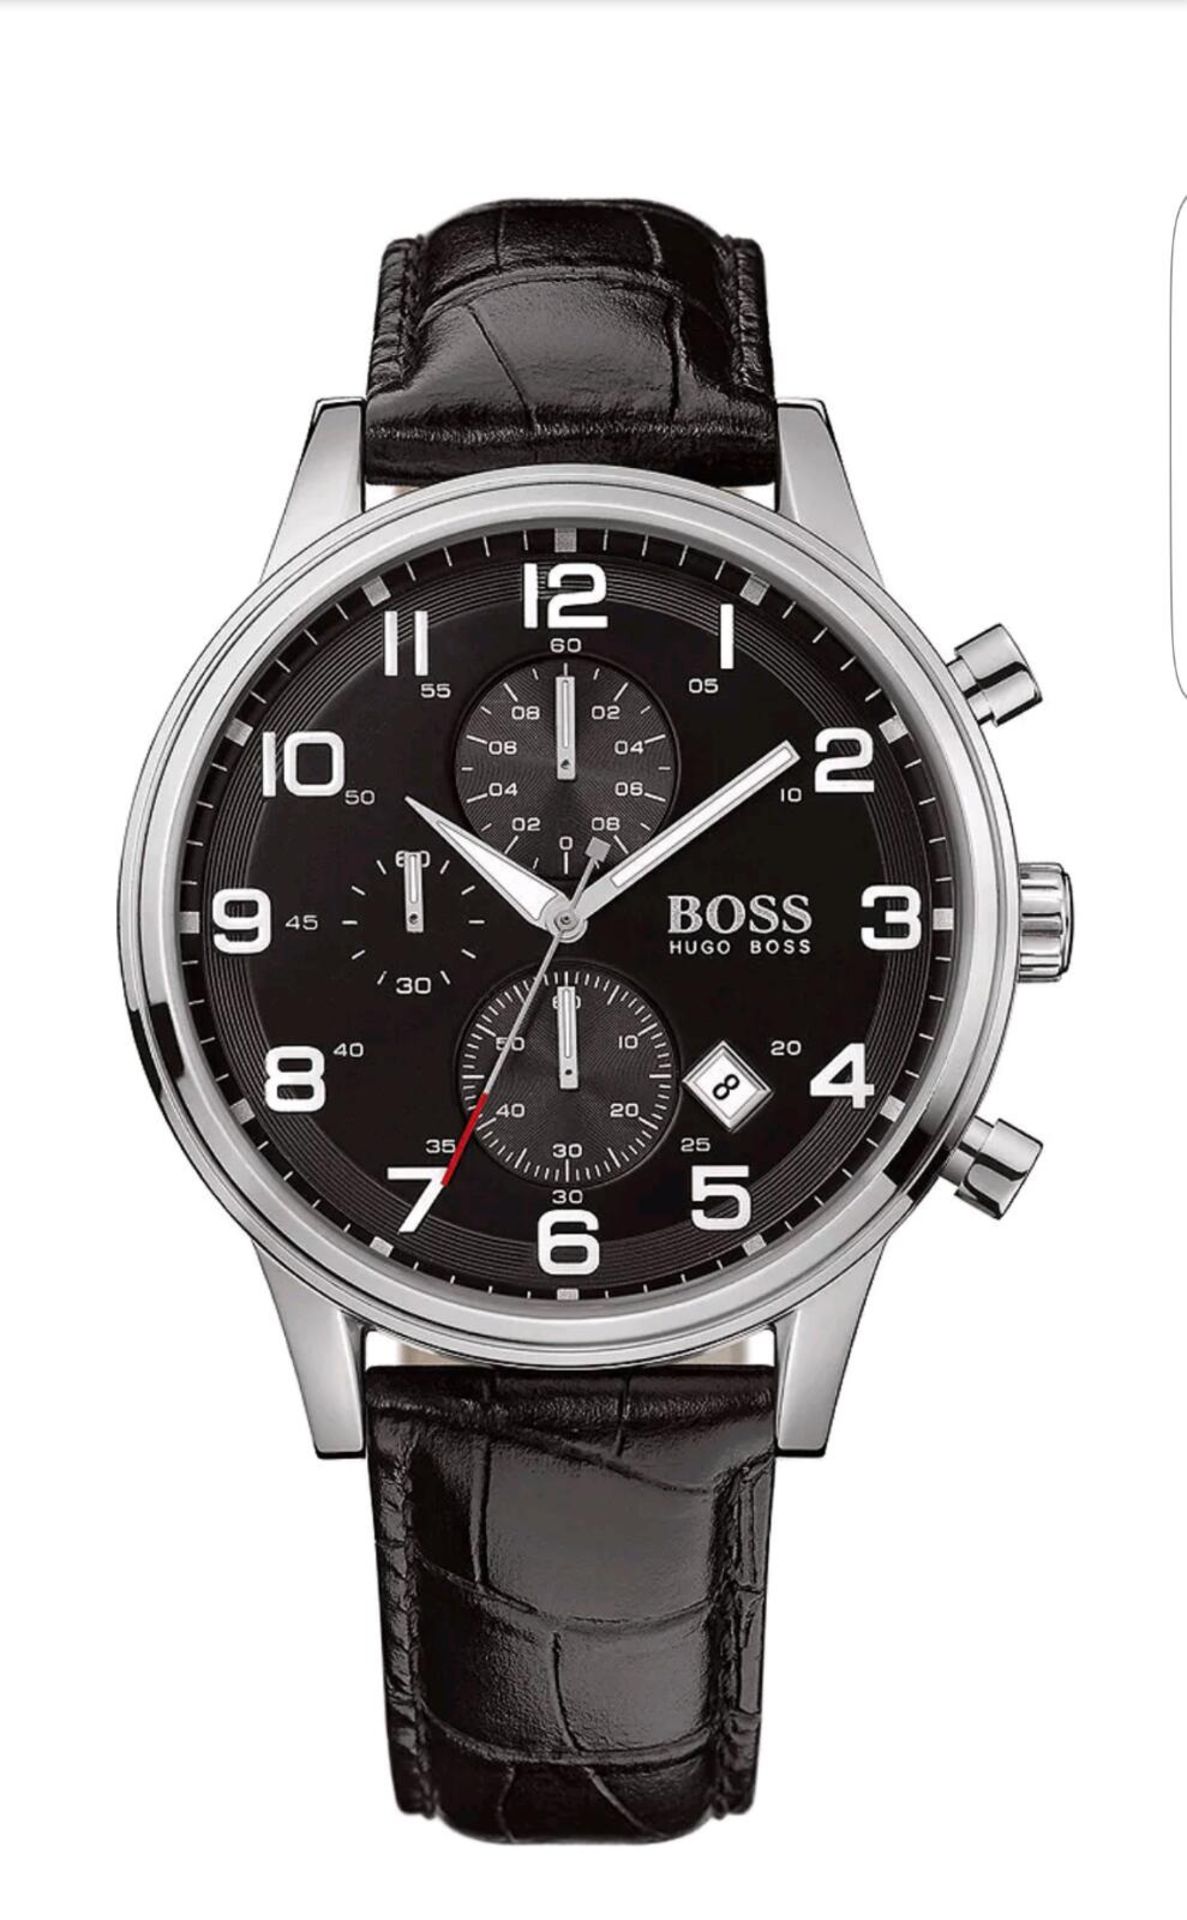 BRAND NEW HUGO BOSS 1512448, GENTS DESIGNER WATCH, COMPLETE WITH ORIGINAL BOX AND MANUAL - RRP £499